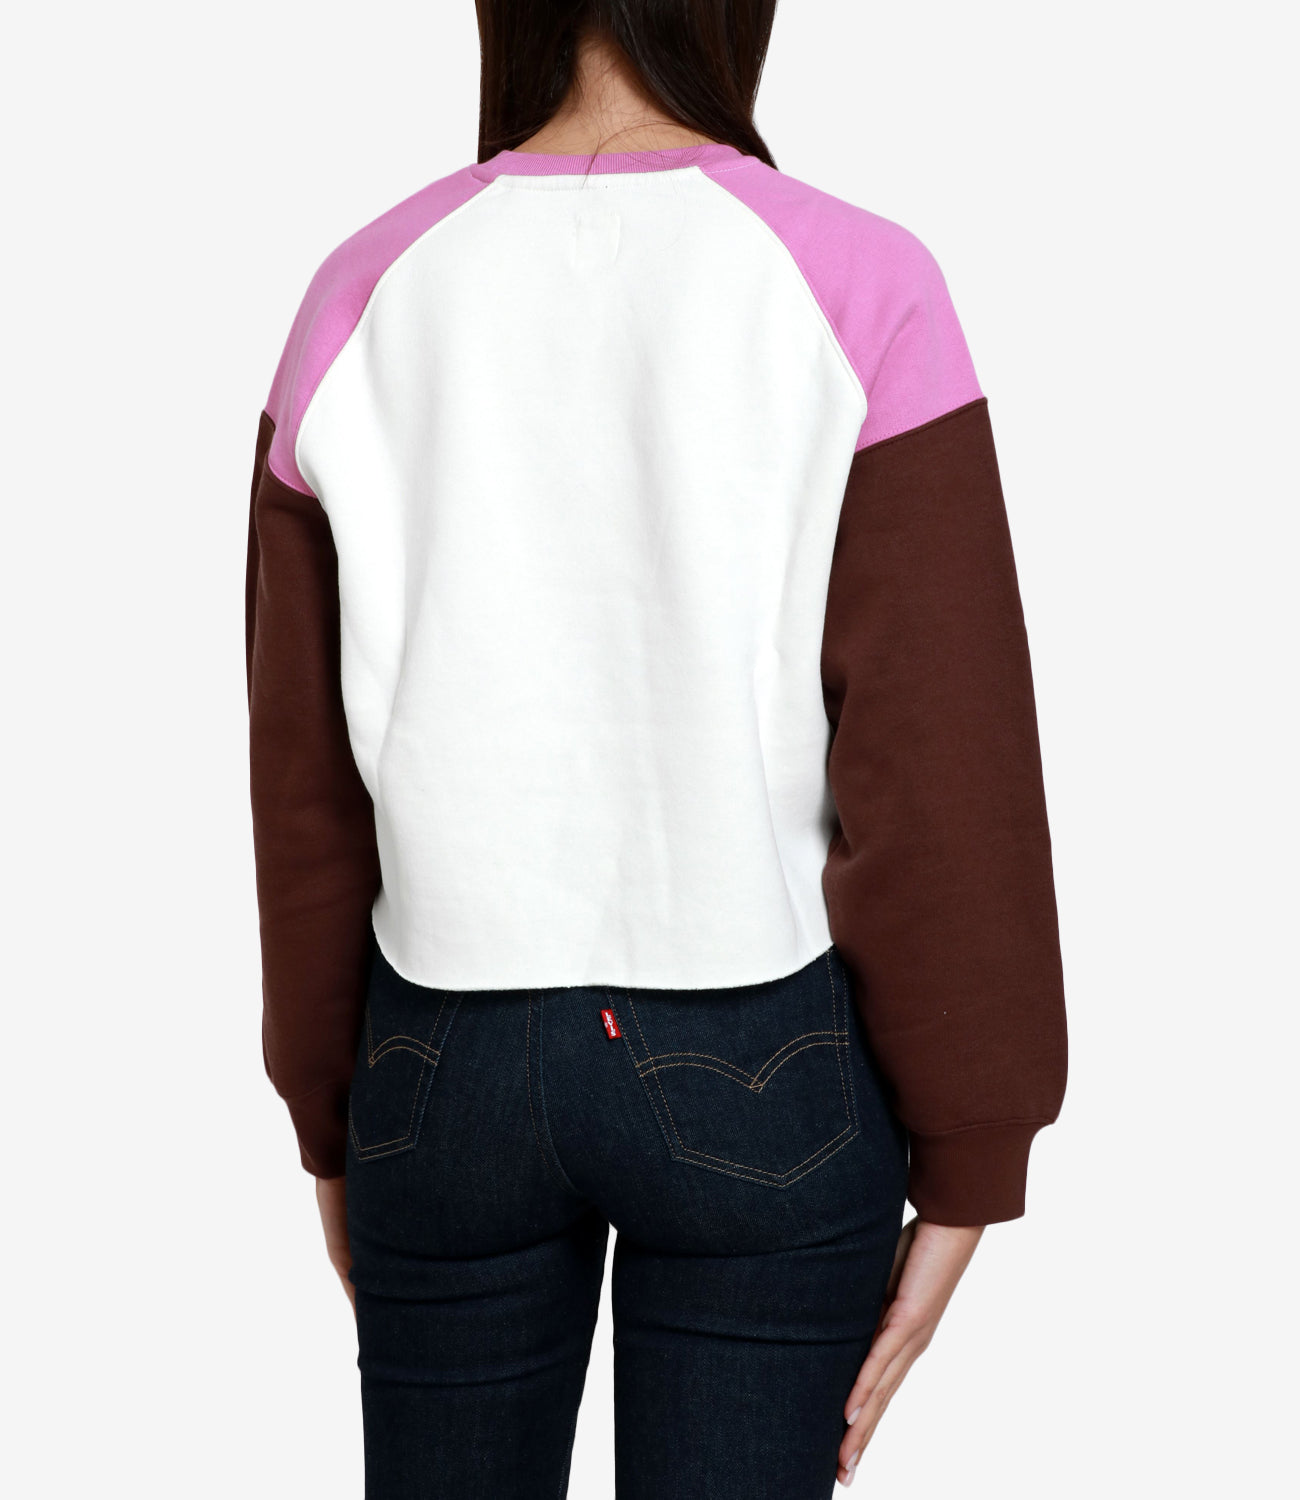 Levis | Gt Campout Sweatshirt Pink and White